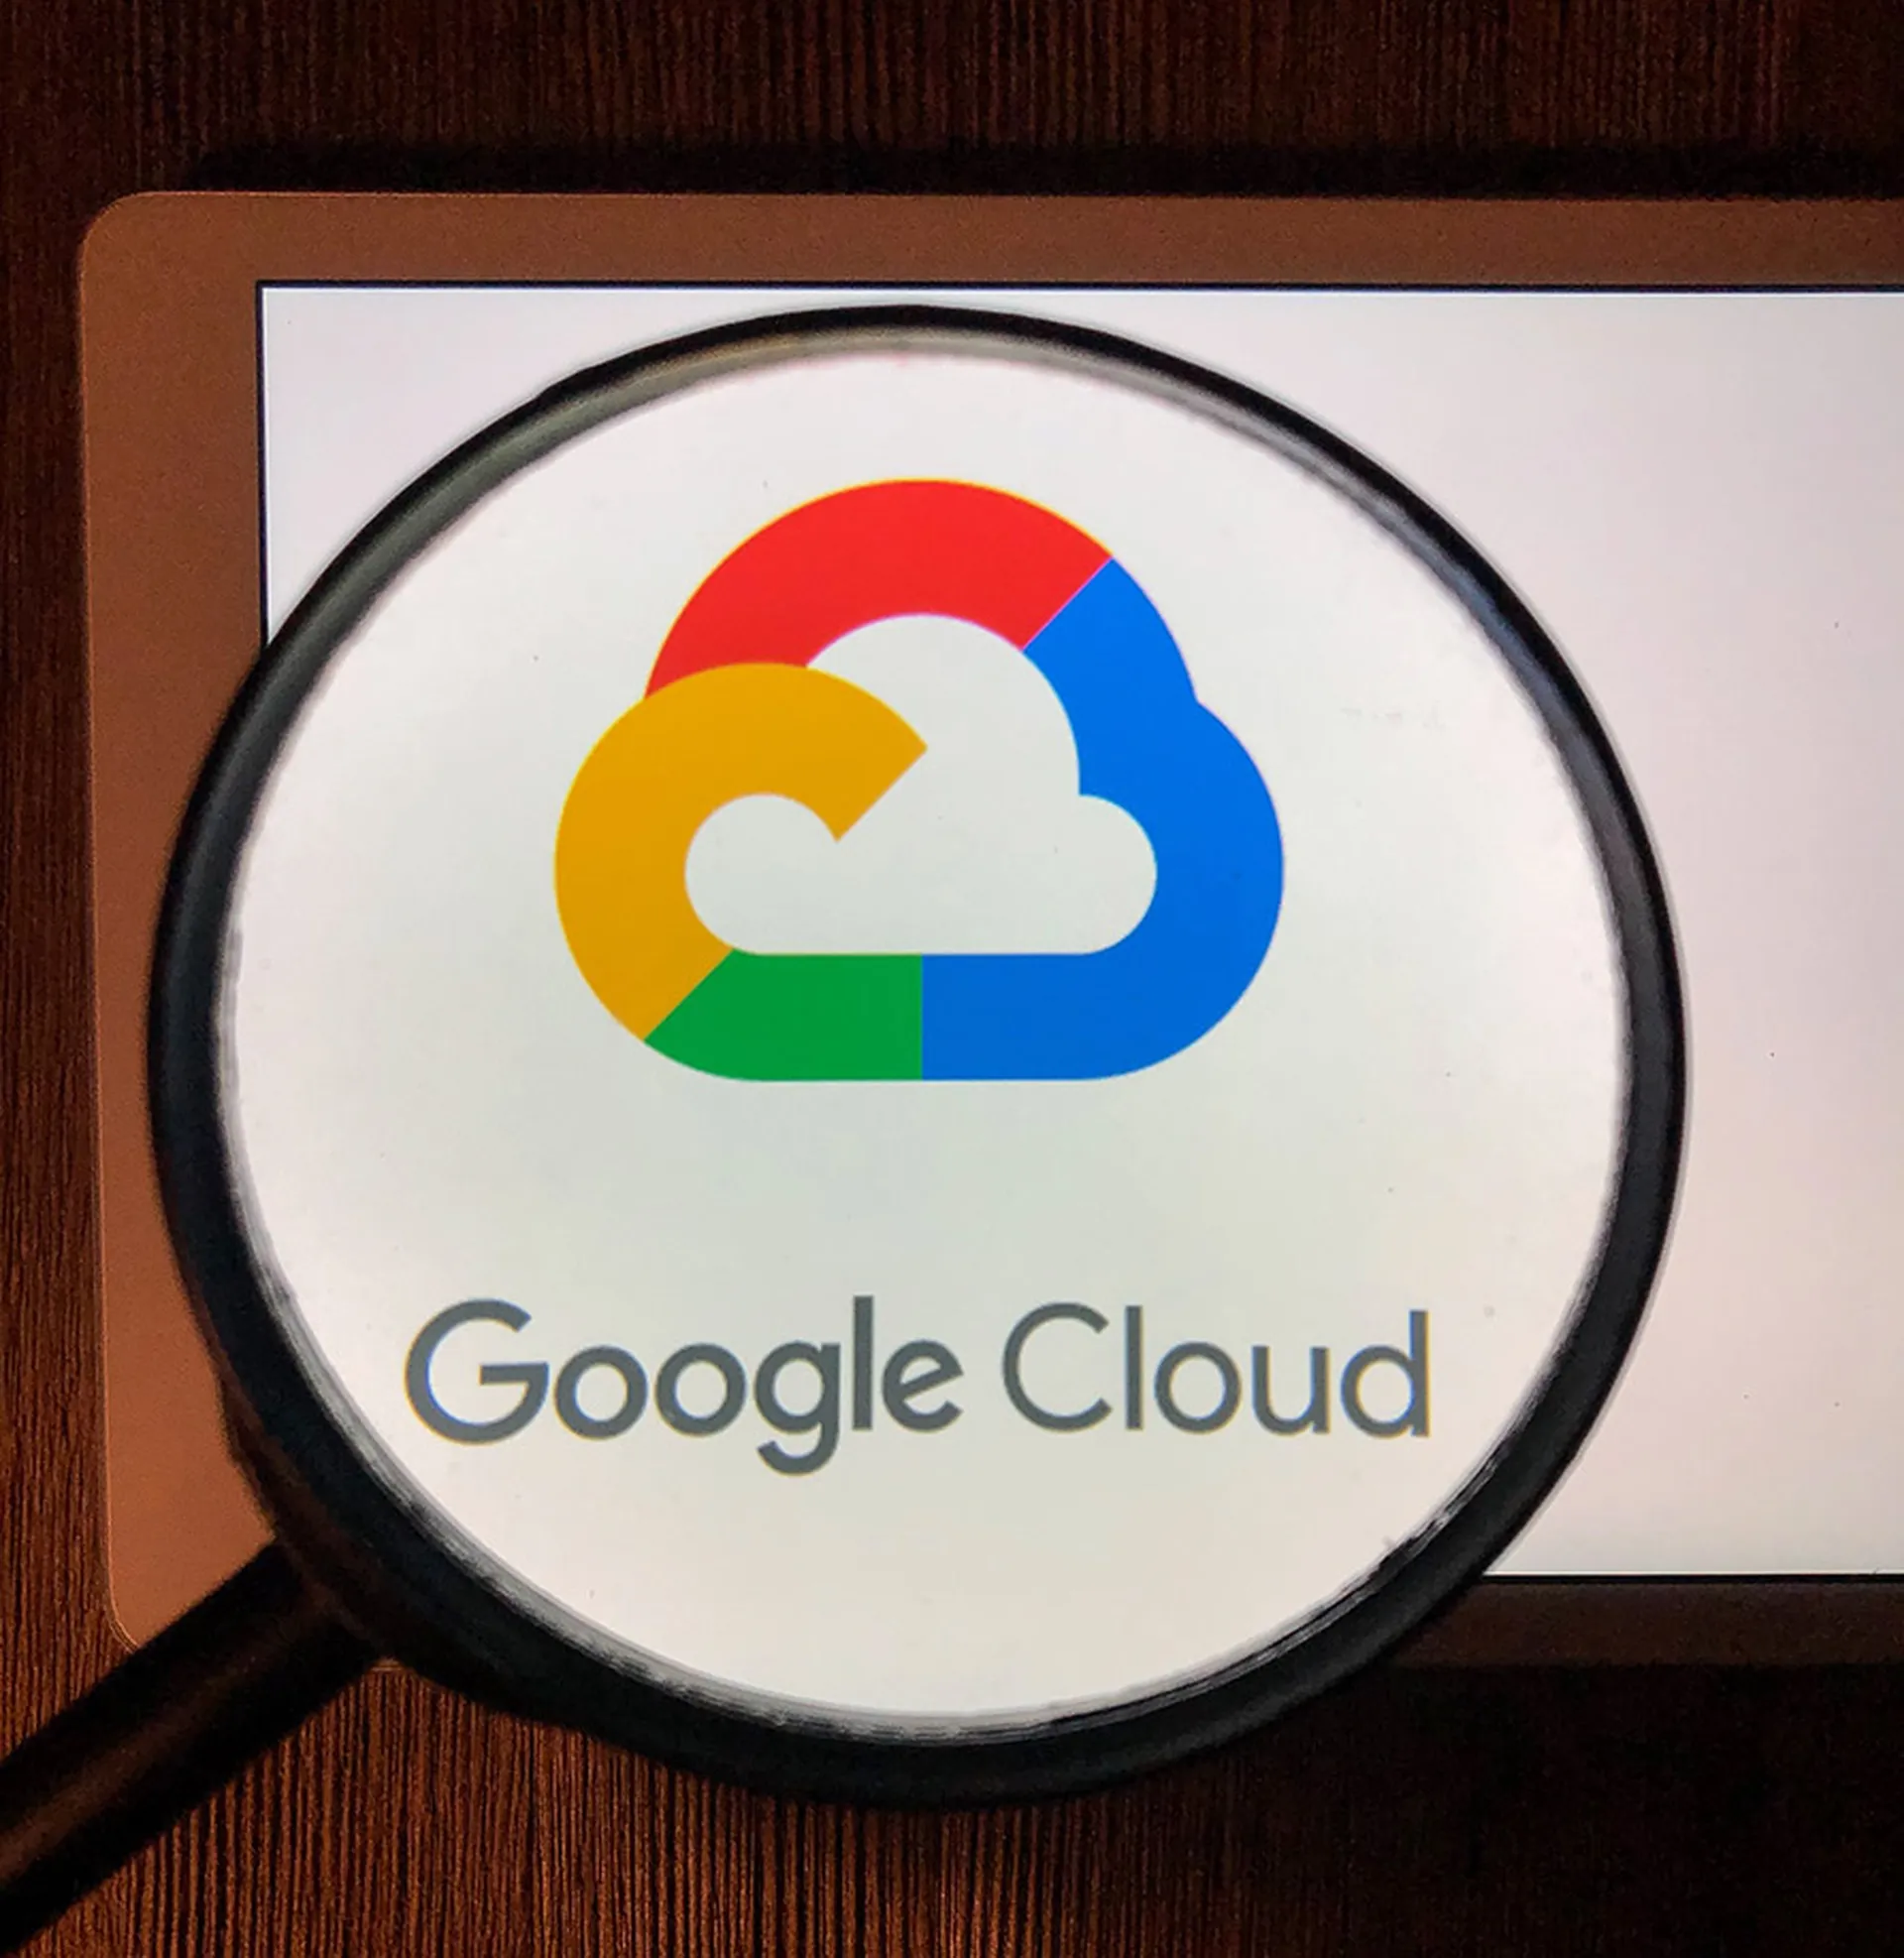 Magnified view of the Google Cloud logo on a computer screen